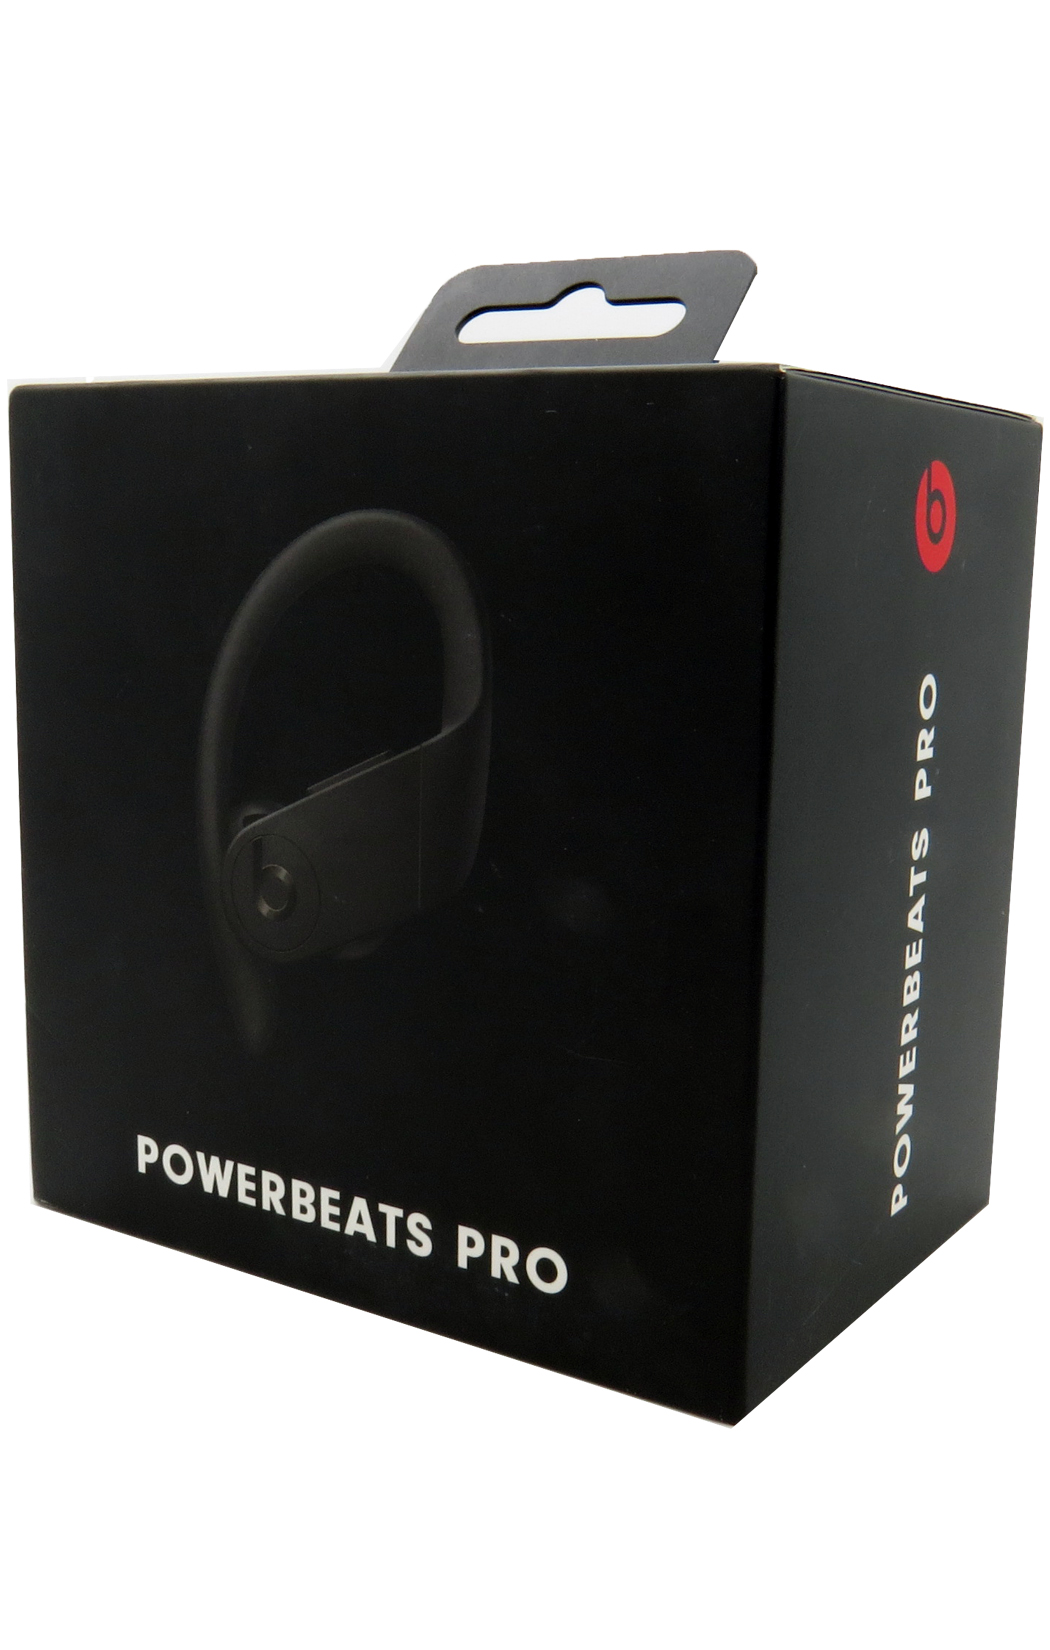 powerbeats pro delivery